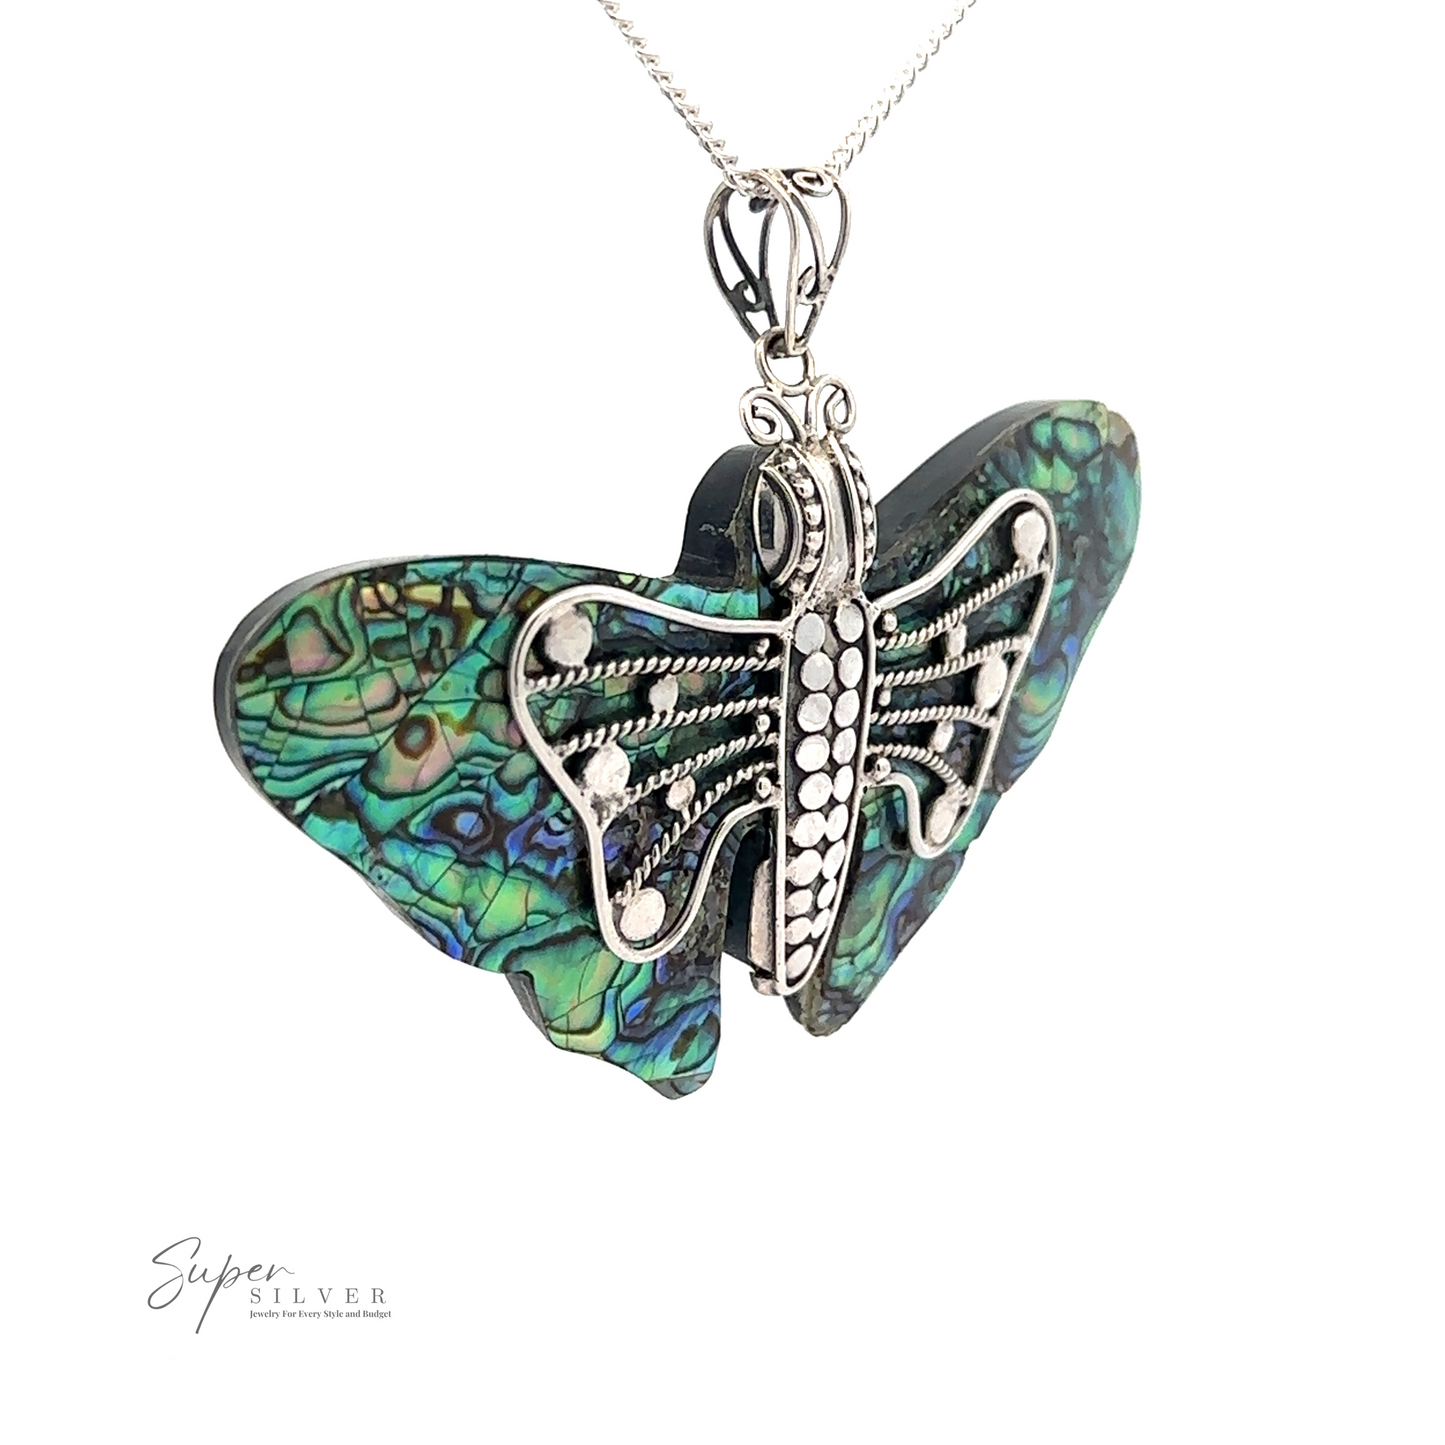 
                  
                    A Large Abalone Butterfly Pendant on a silver chain, showcasing its healing properties. The "Super Silver" logo is visible in the bottom left corner.
                  
                